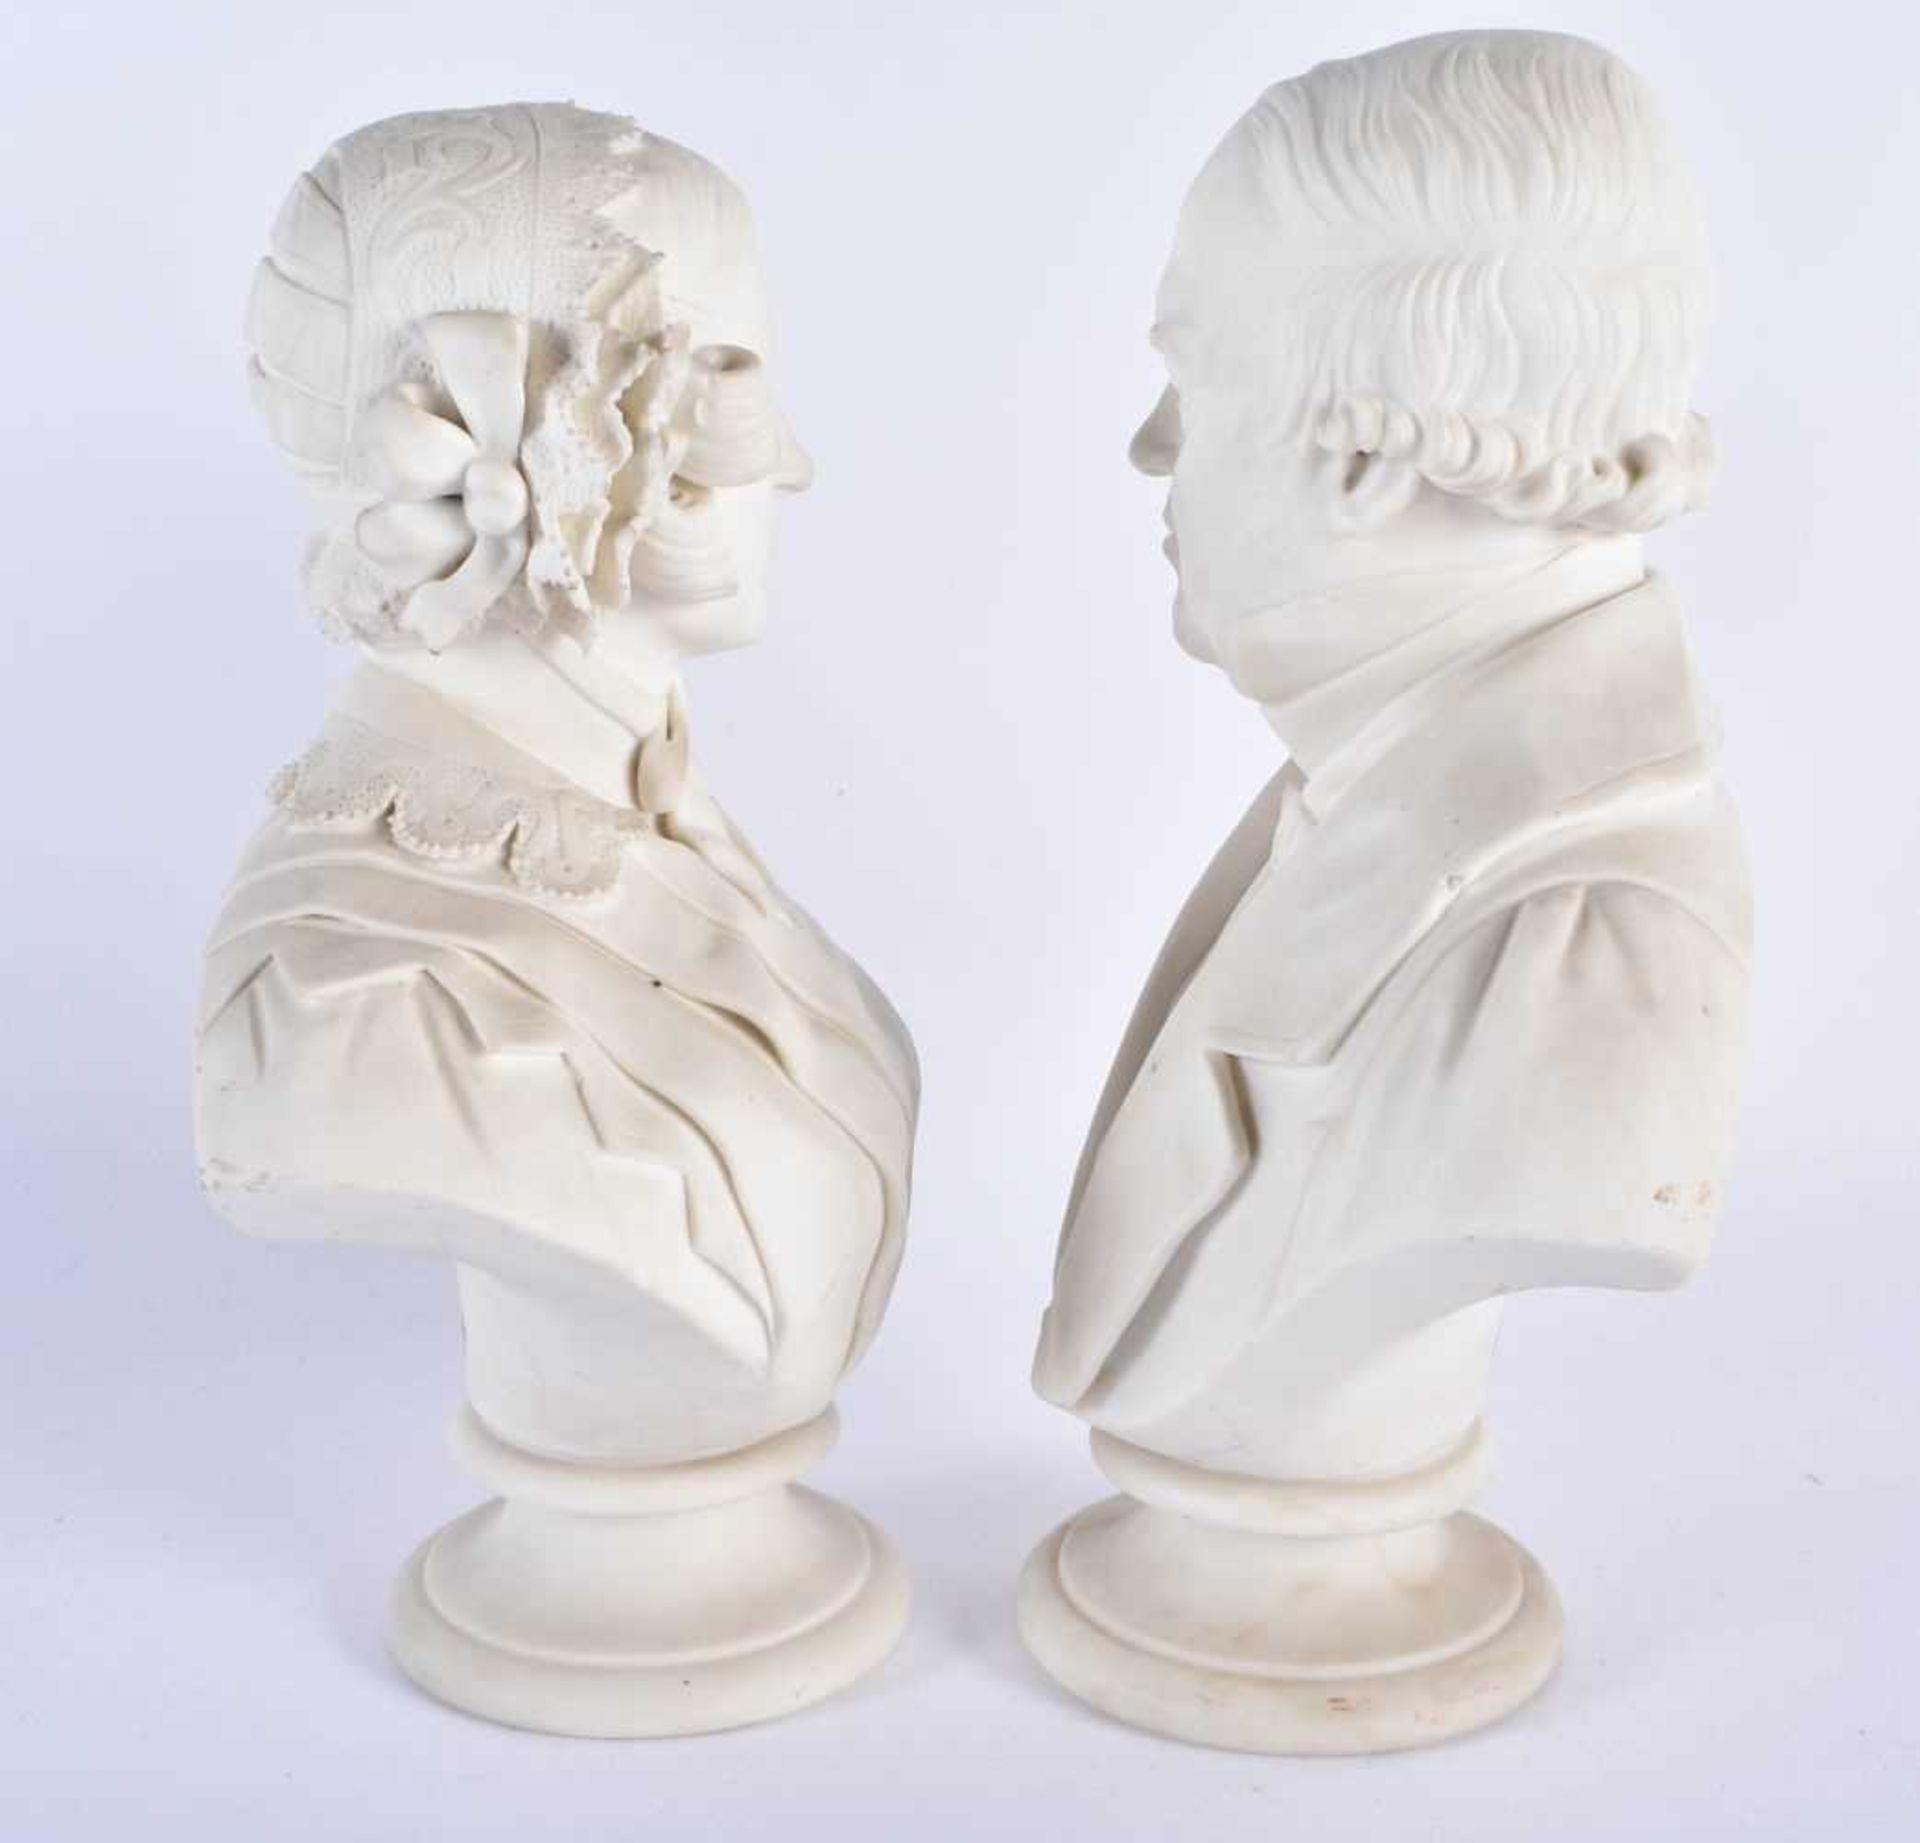 A PAIR OF 19TH CENTURY KERR & BINNS WORCESTER PARIAN WARE BUSTS modelled as a male and female. - Image 2 of 6